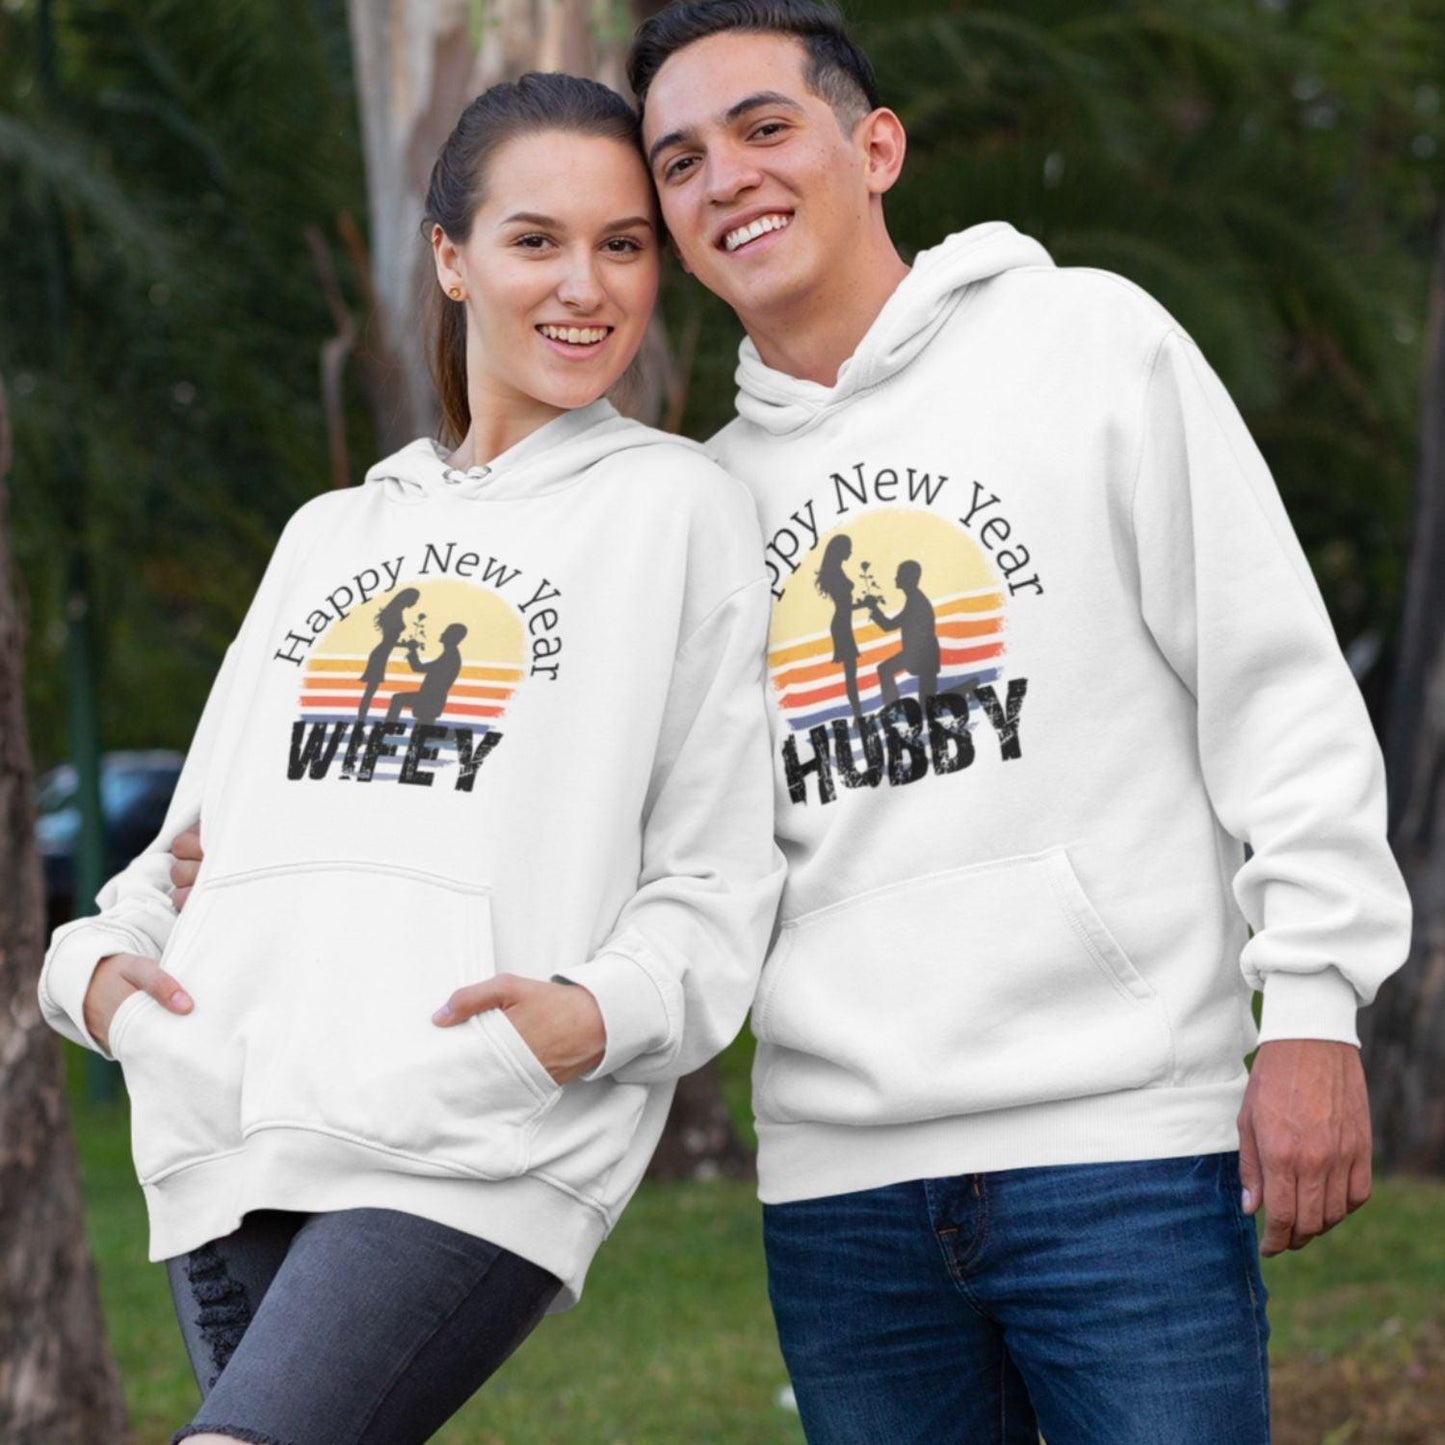 Happy New Year Matching Set - Adorable Couples' Outfits, Hubby & Wifey, Romantic Gift - 4Lovebirds